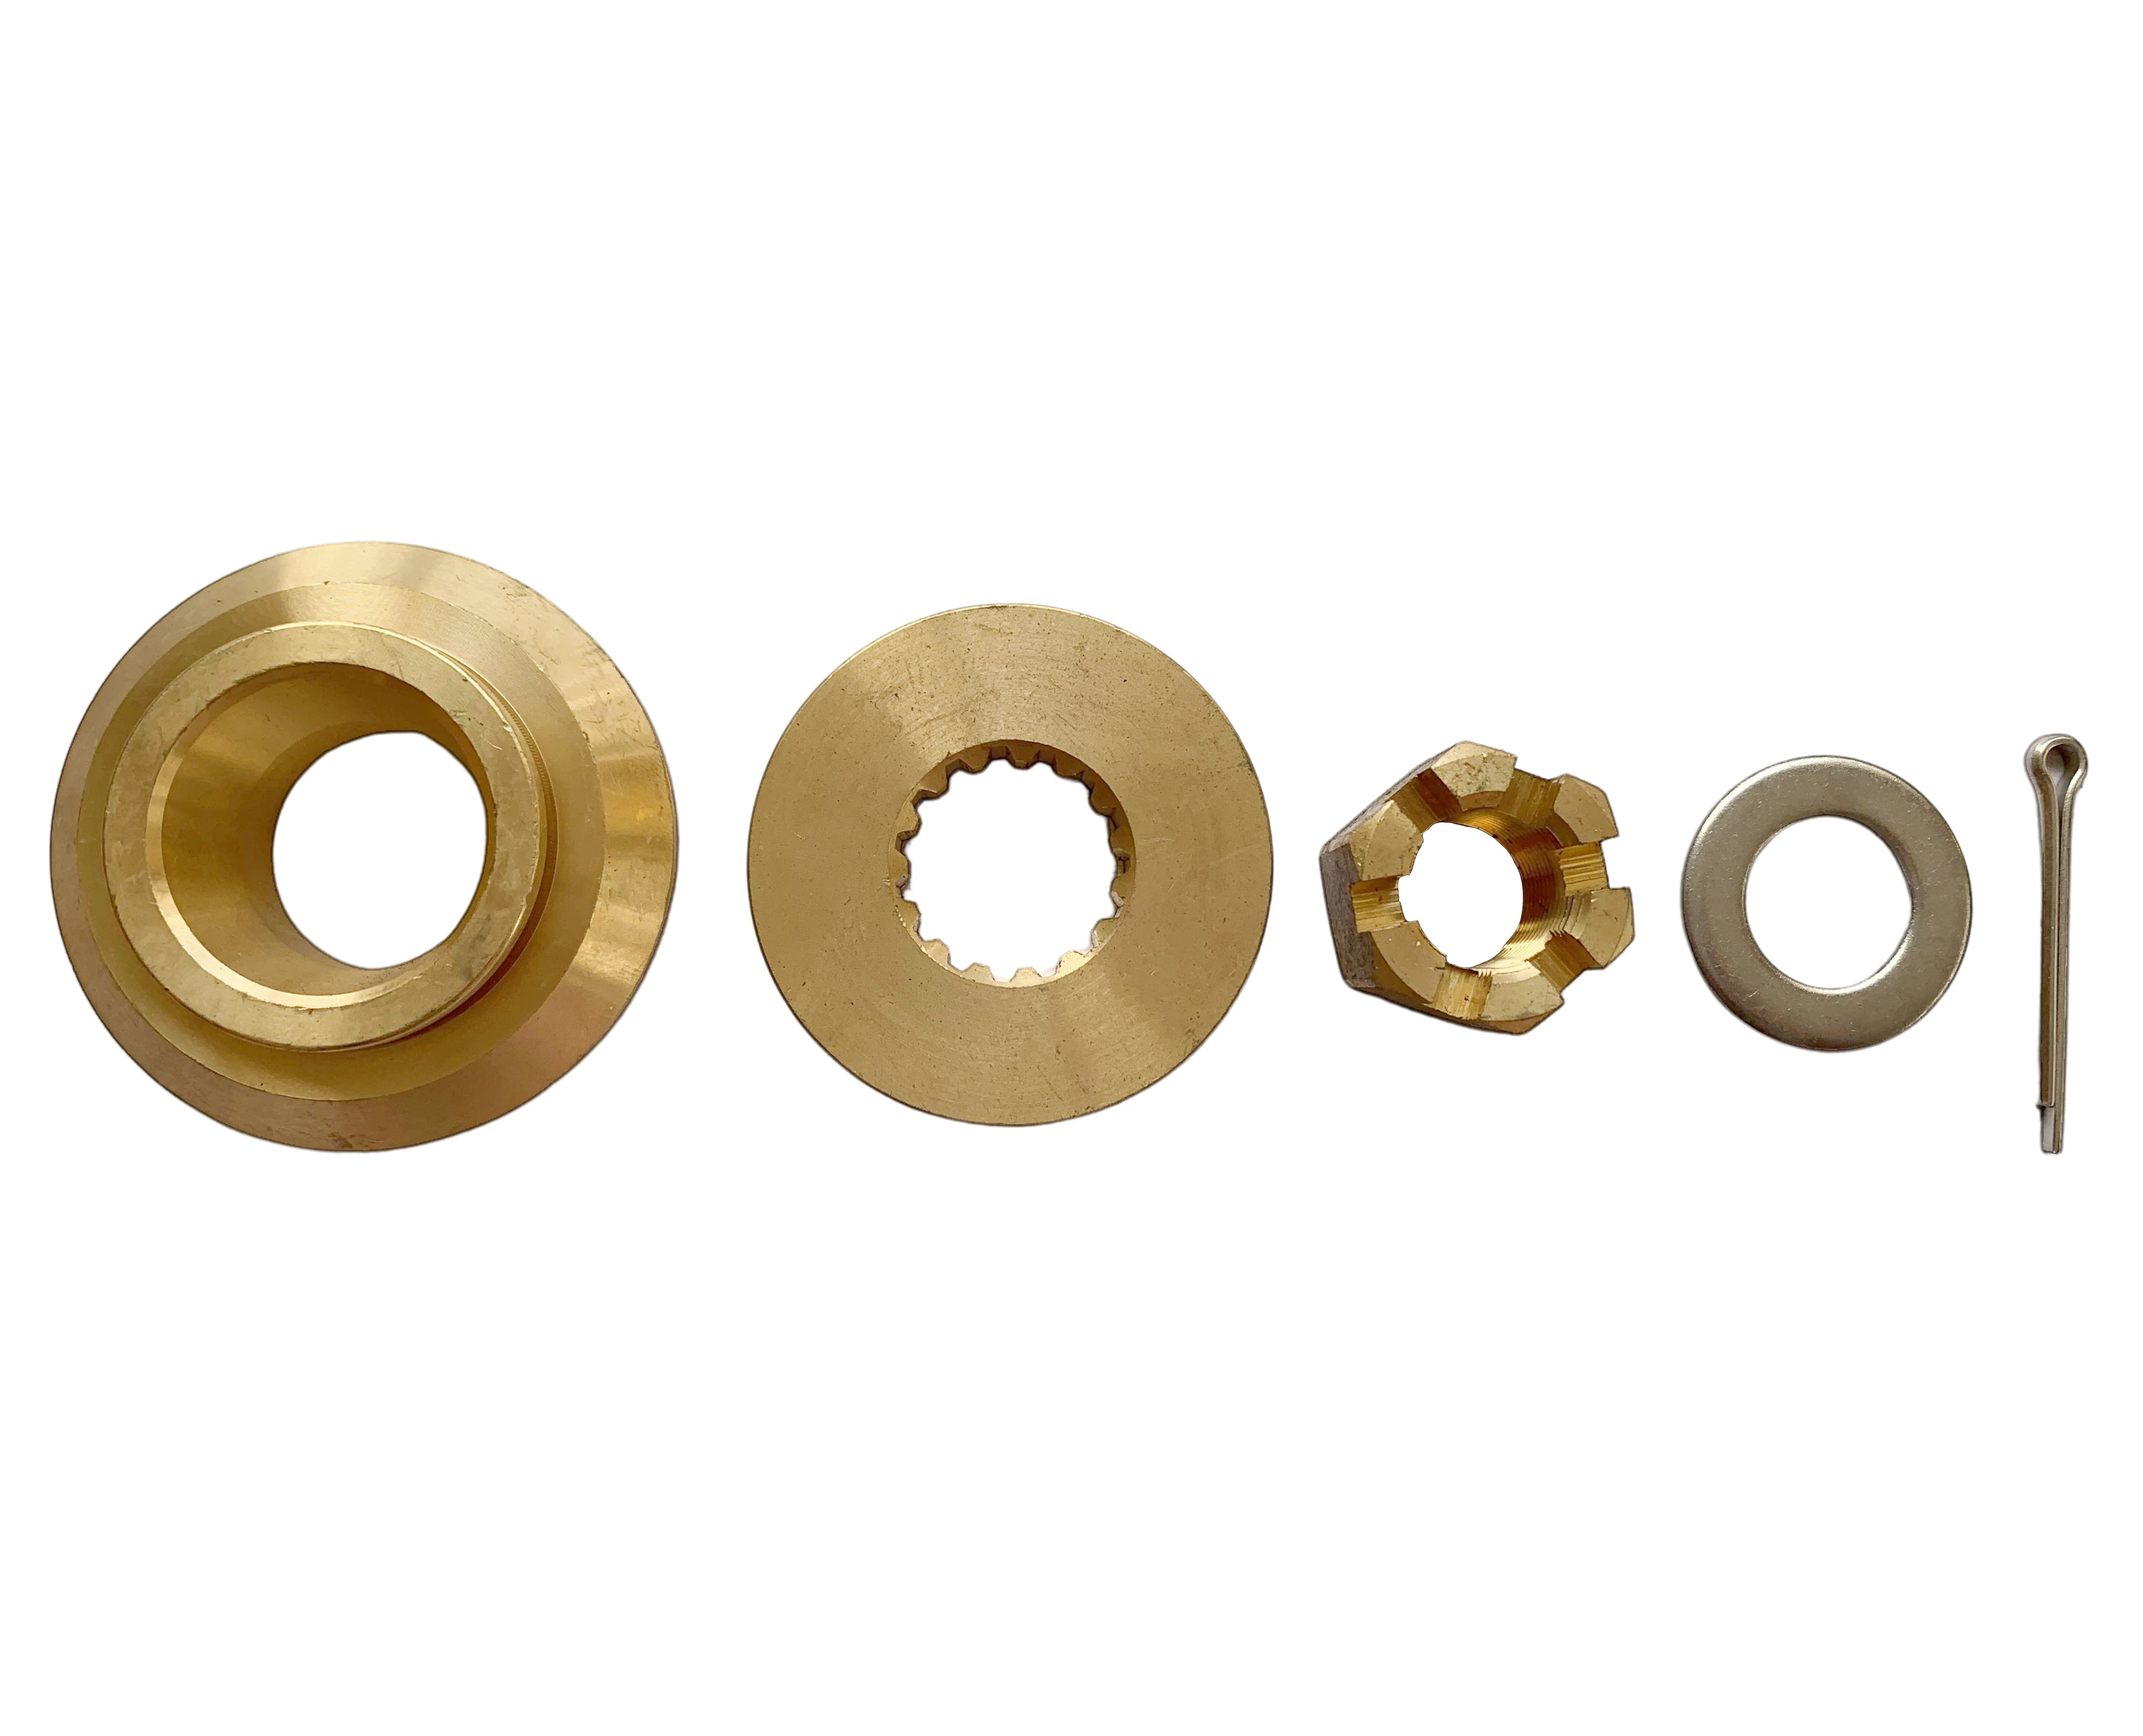 Propeller Installation Hardware Kits fit TOHATSU 60HP-140HP Outboard Motos Thrust Washer/Spacer/Washer/Nut/Cotter Pin Included